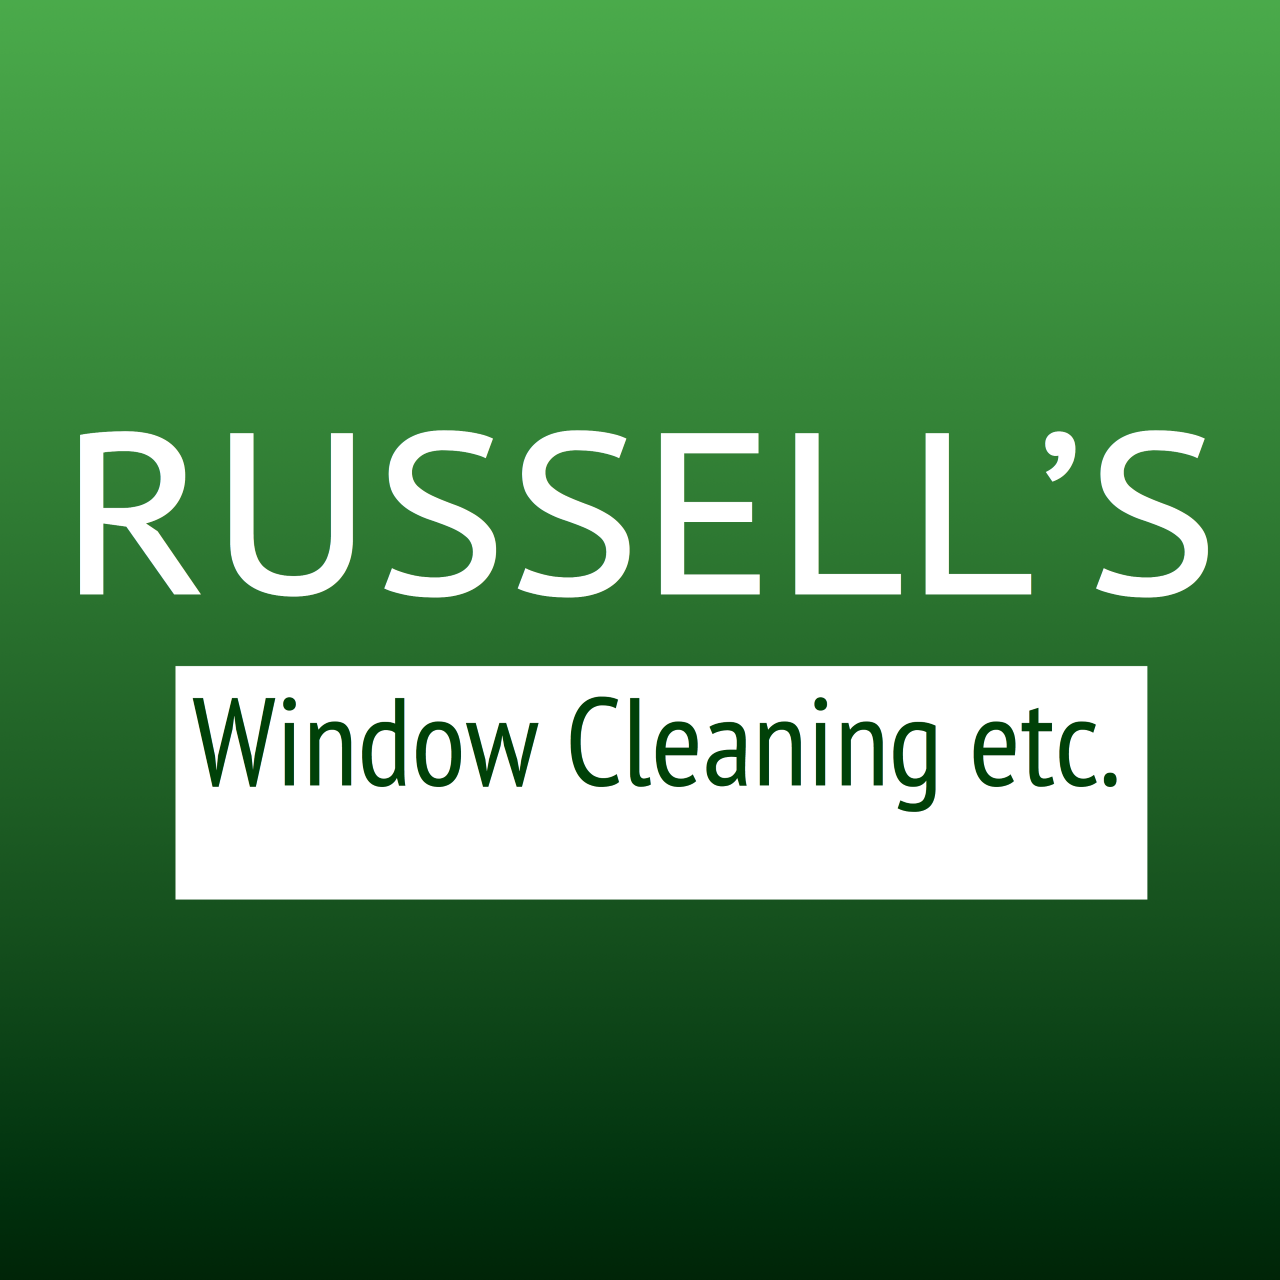 Russell's Window Cleaning etc. Logo